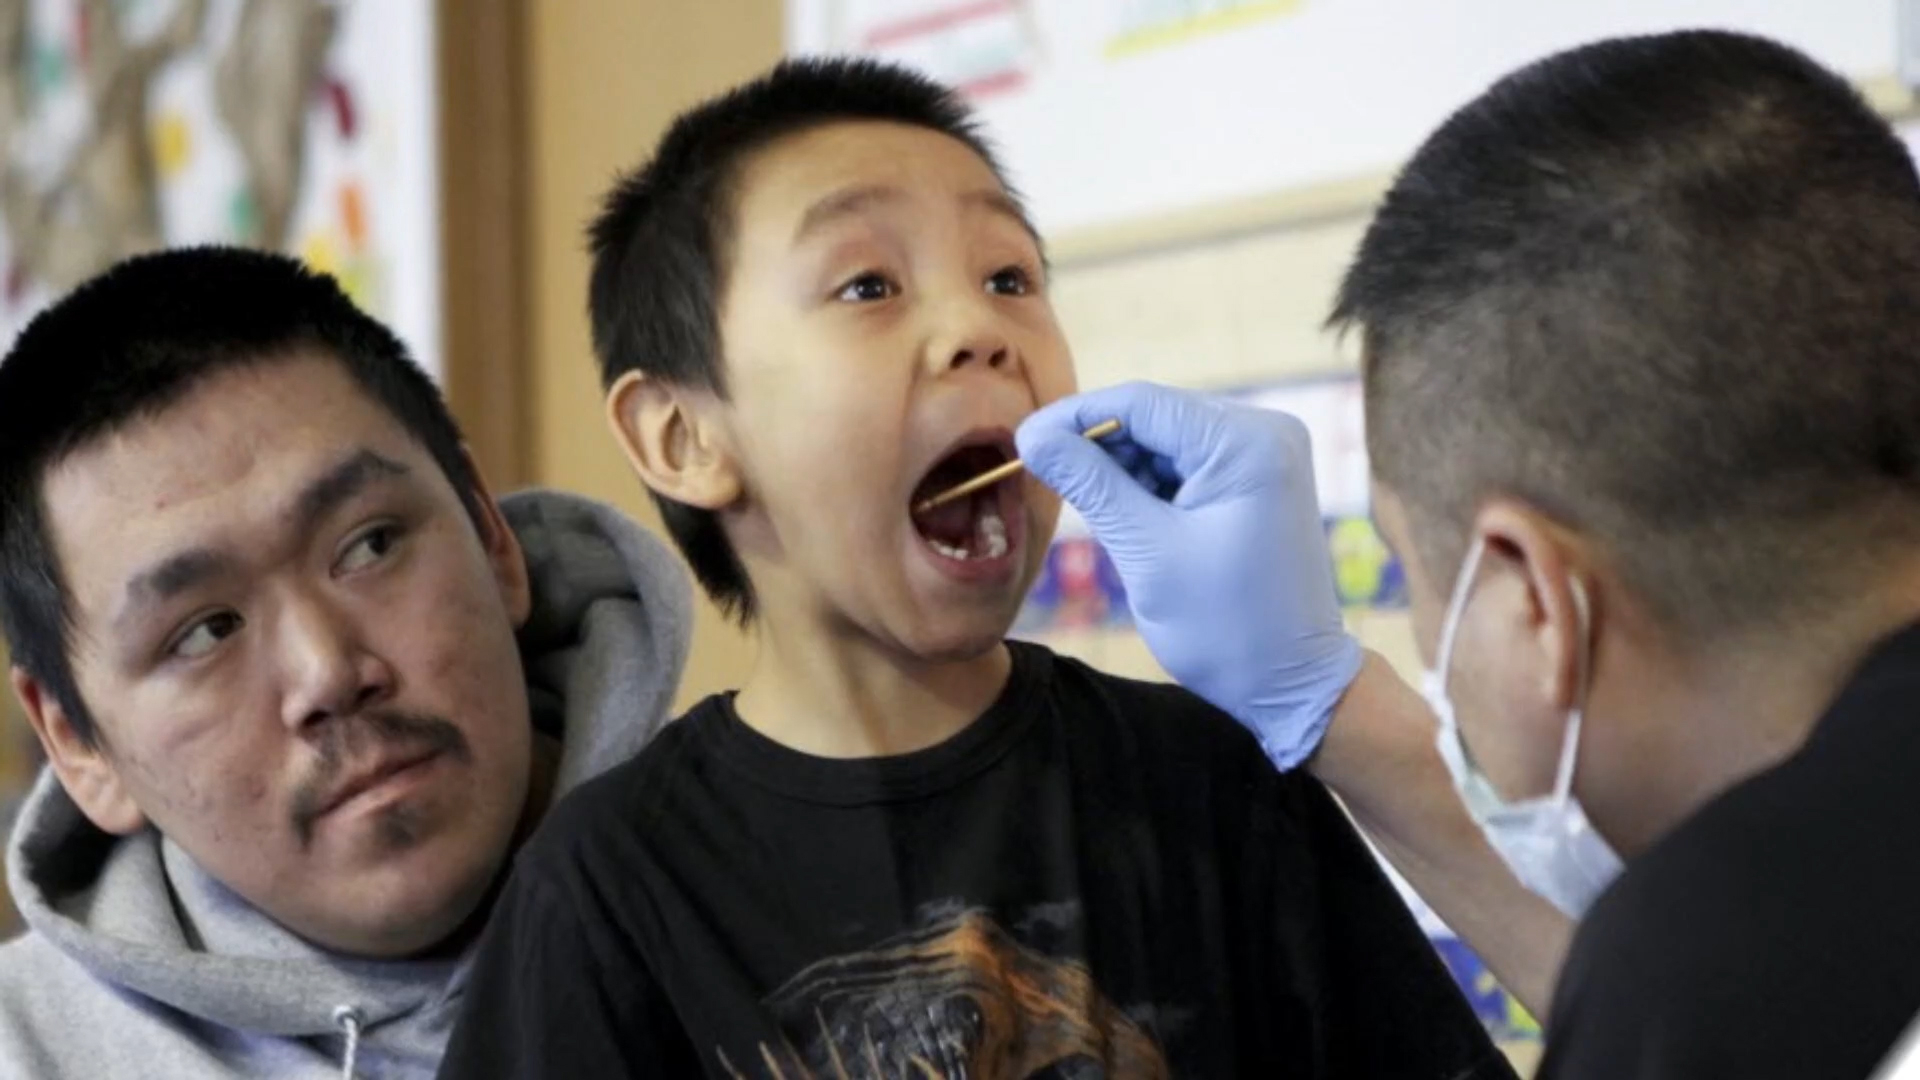 The white paper, “American Indian and Alaska Native Communities Face a ‘Disproportionate Burden of Oral Disease’: Reversing Inequities Involves Challenges and Opportunities,” includes striking new data from CareQuest Institute’s State of Oral Health Equity in America survey and offers strategic recommendations on how to address disparities and inequities facing AI/AN communities.